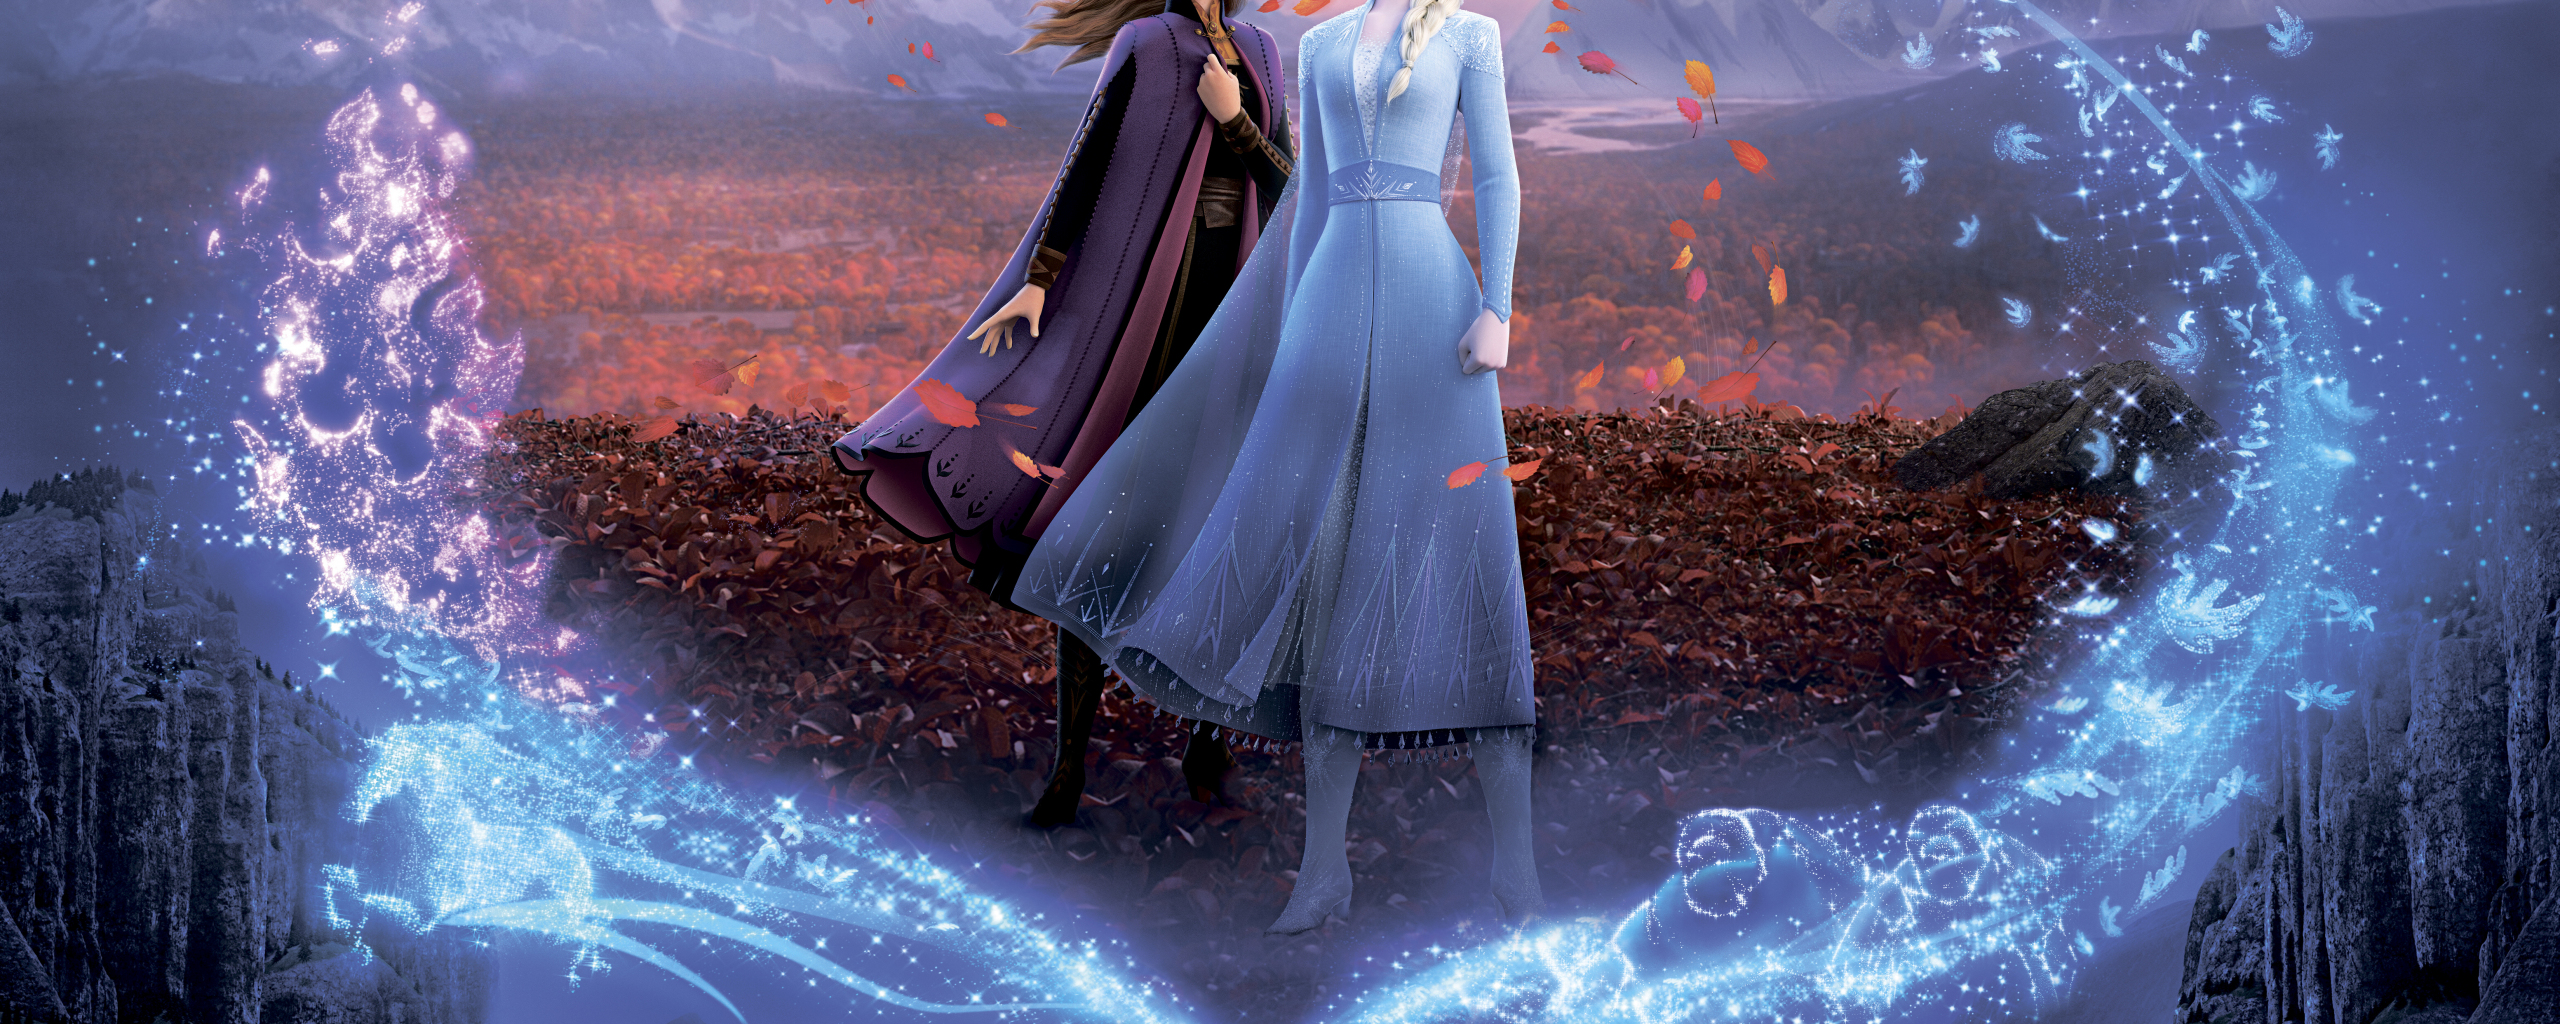 Download wallpaper 2560x1024 frozen 2, royal sisters, movie, poster ...